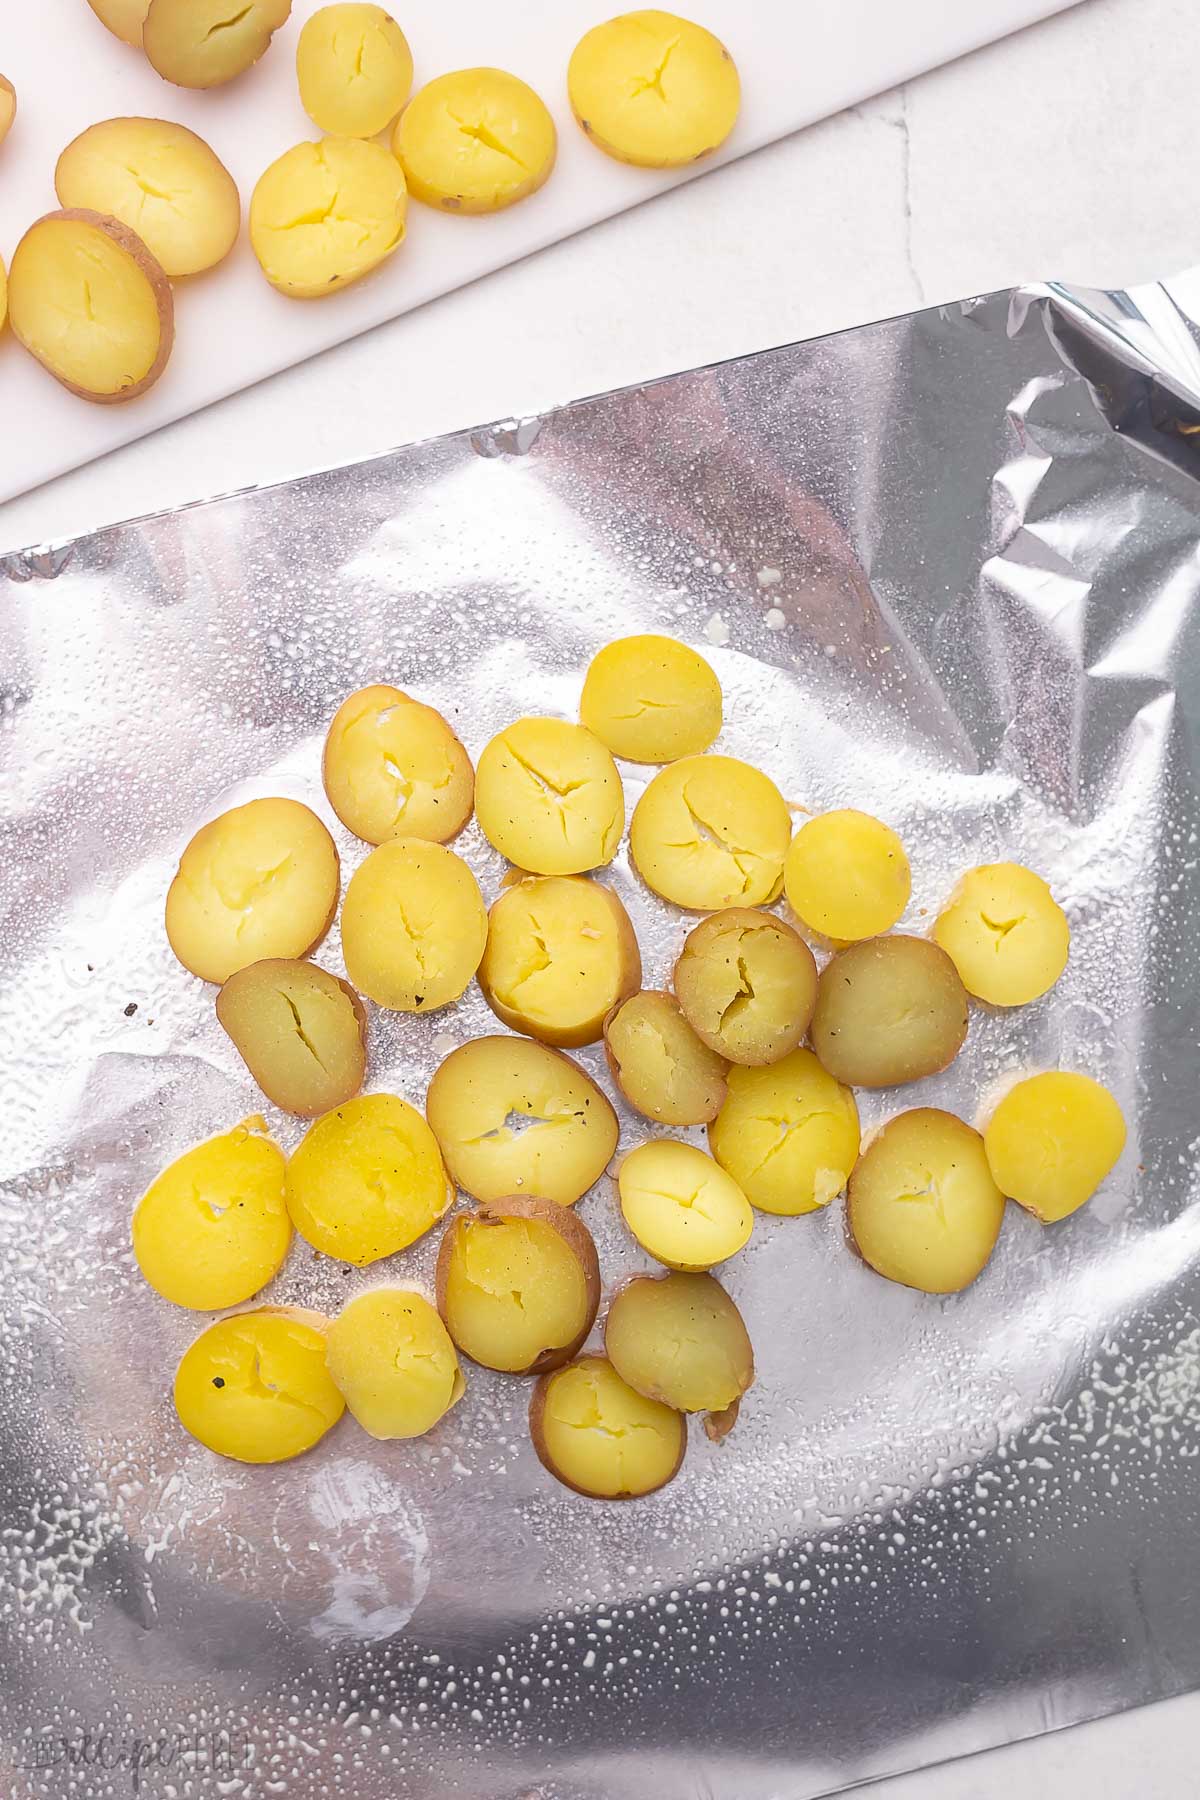 sliced small potatoes on greased aluminum foil.